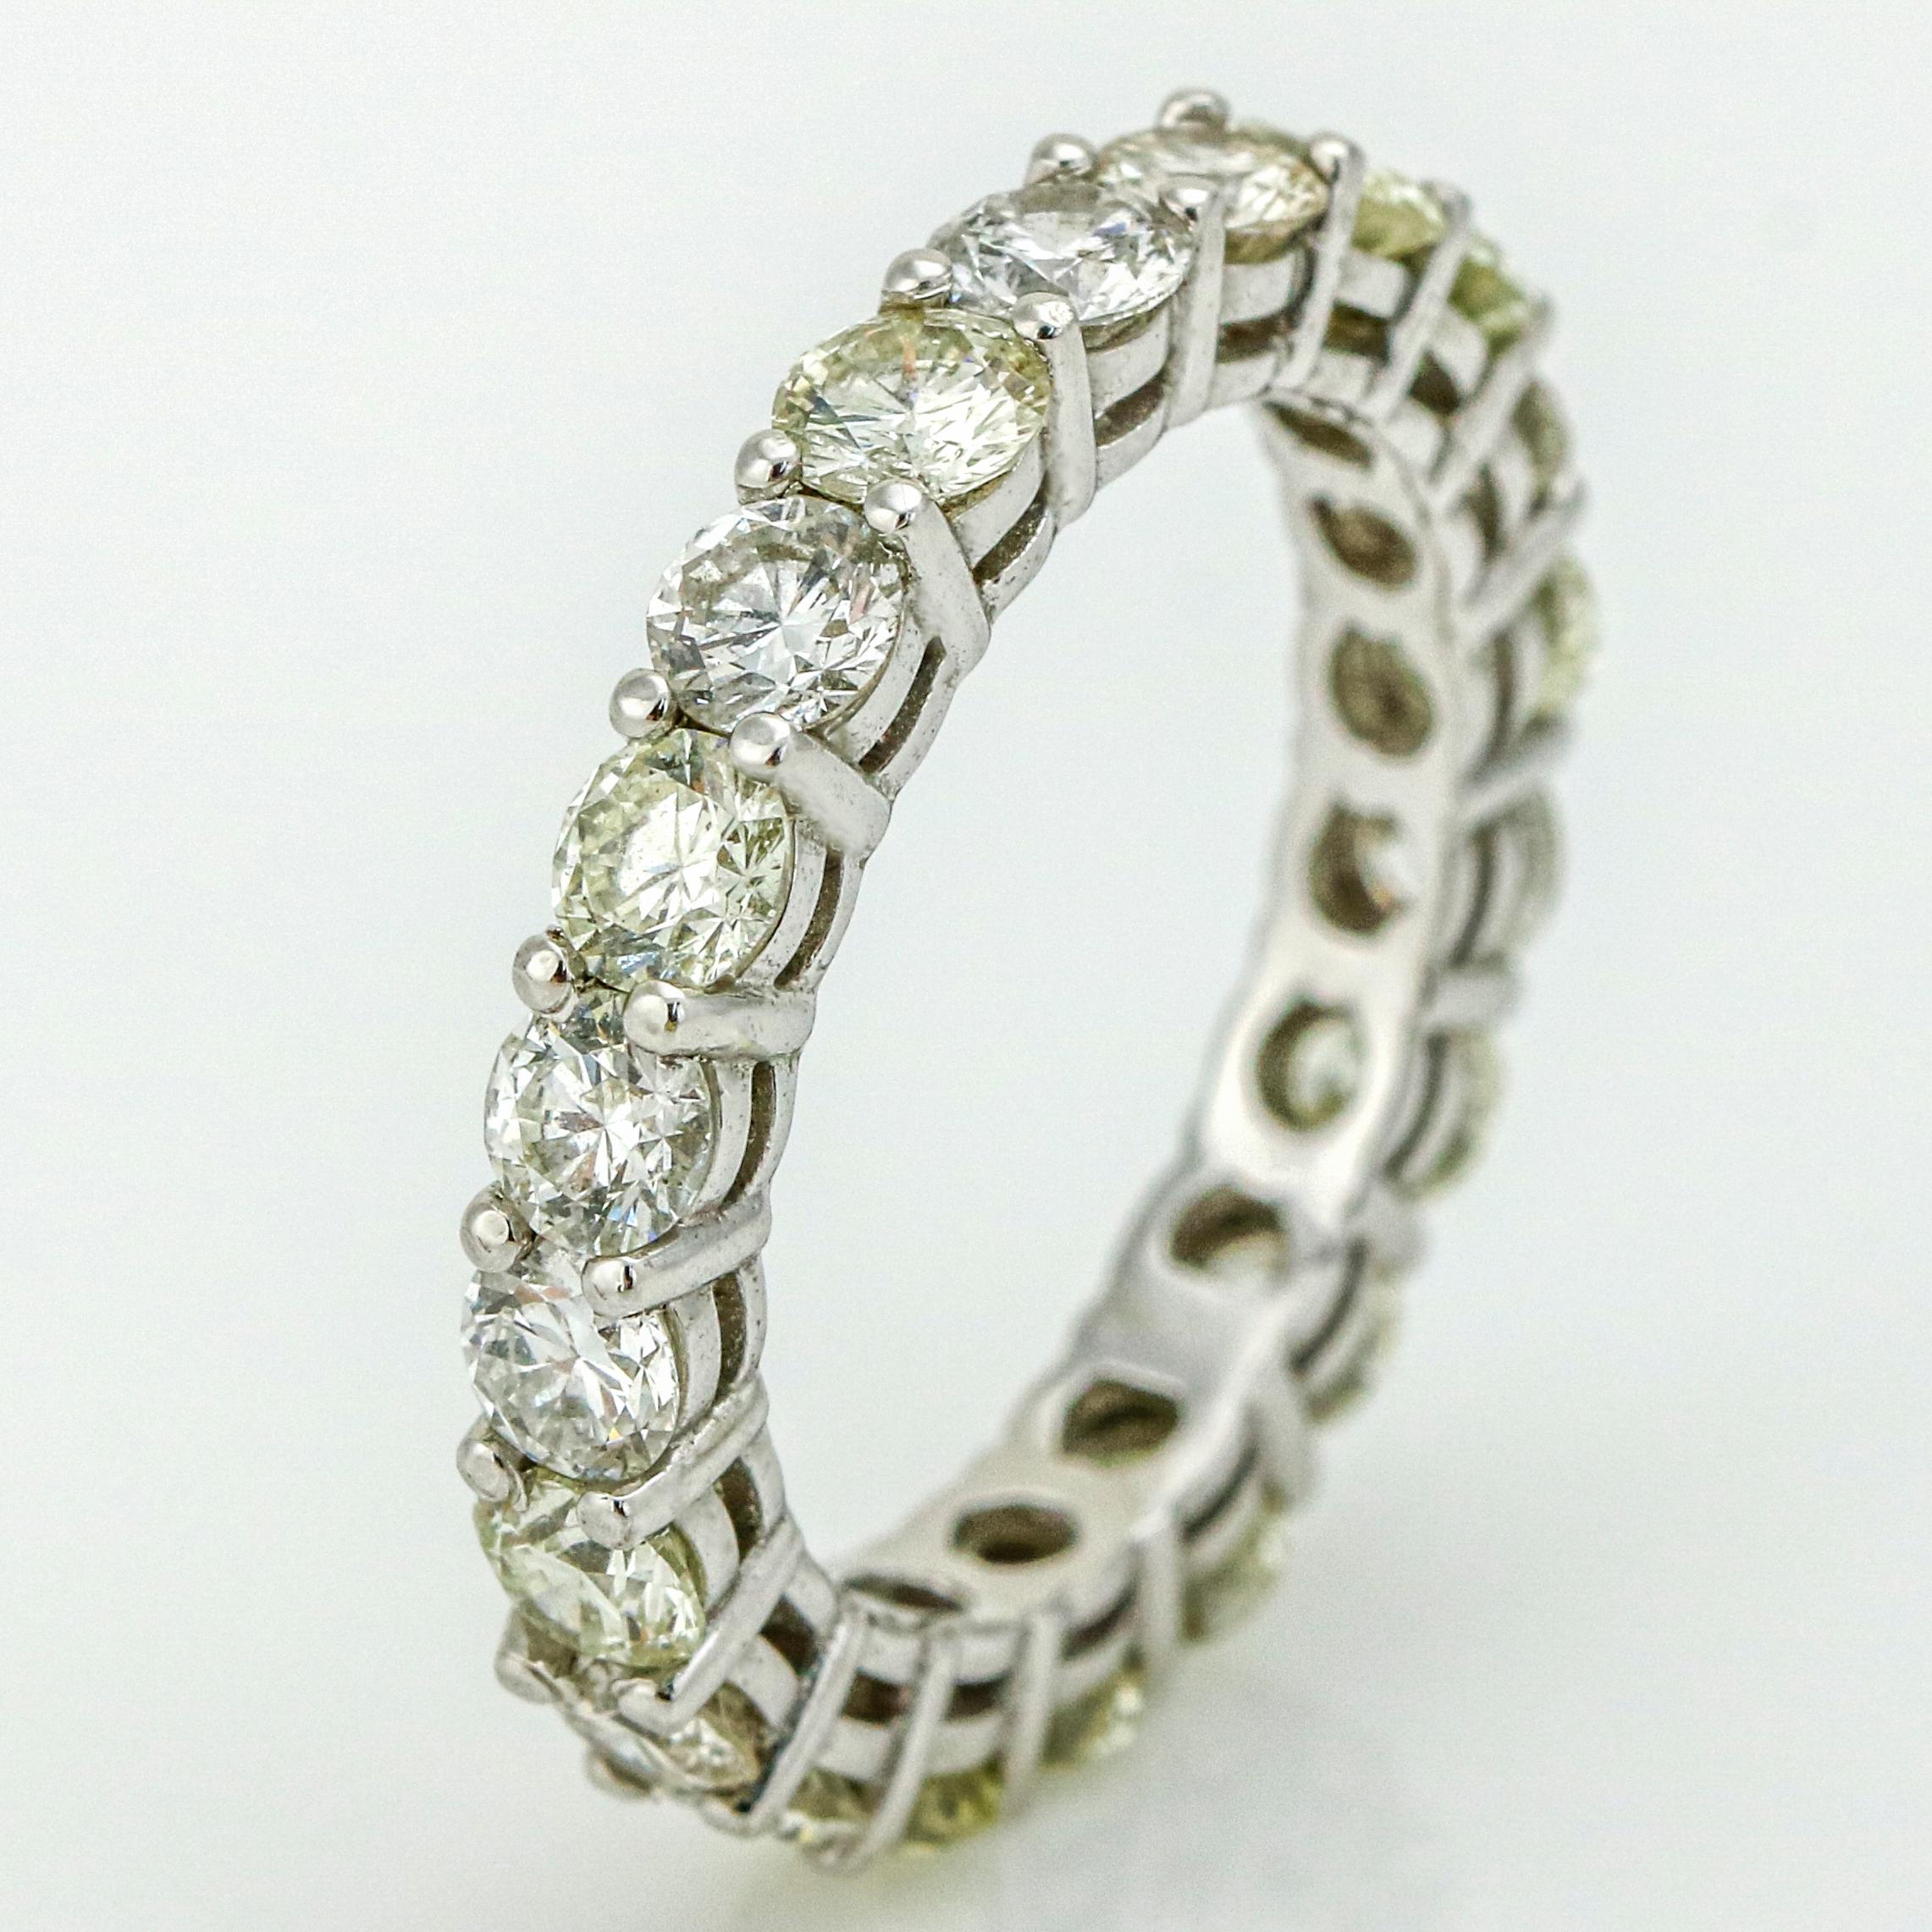 Diamond eternity band in 14-karat white gold. Two prong setting with 19 round brilliant-cut light colored and clear natural diamonds. Size, 6.75. Total carat weight, 3.23 carats. Diamond Clarity, VS-SI